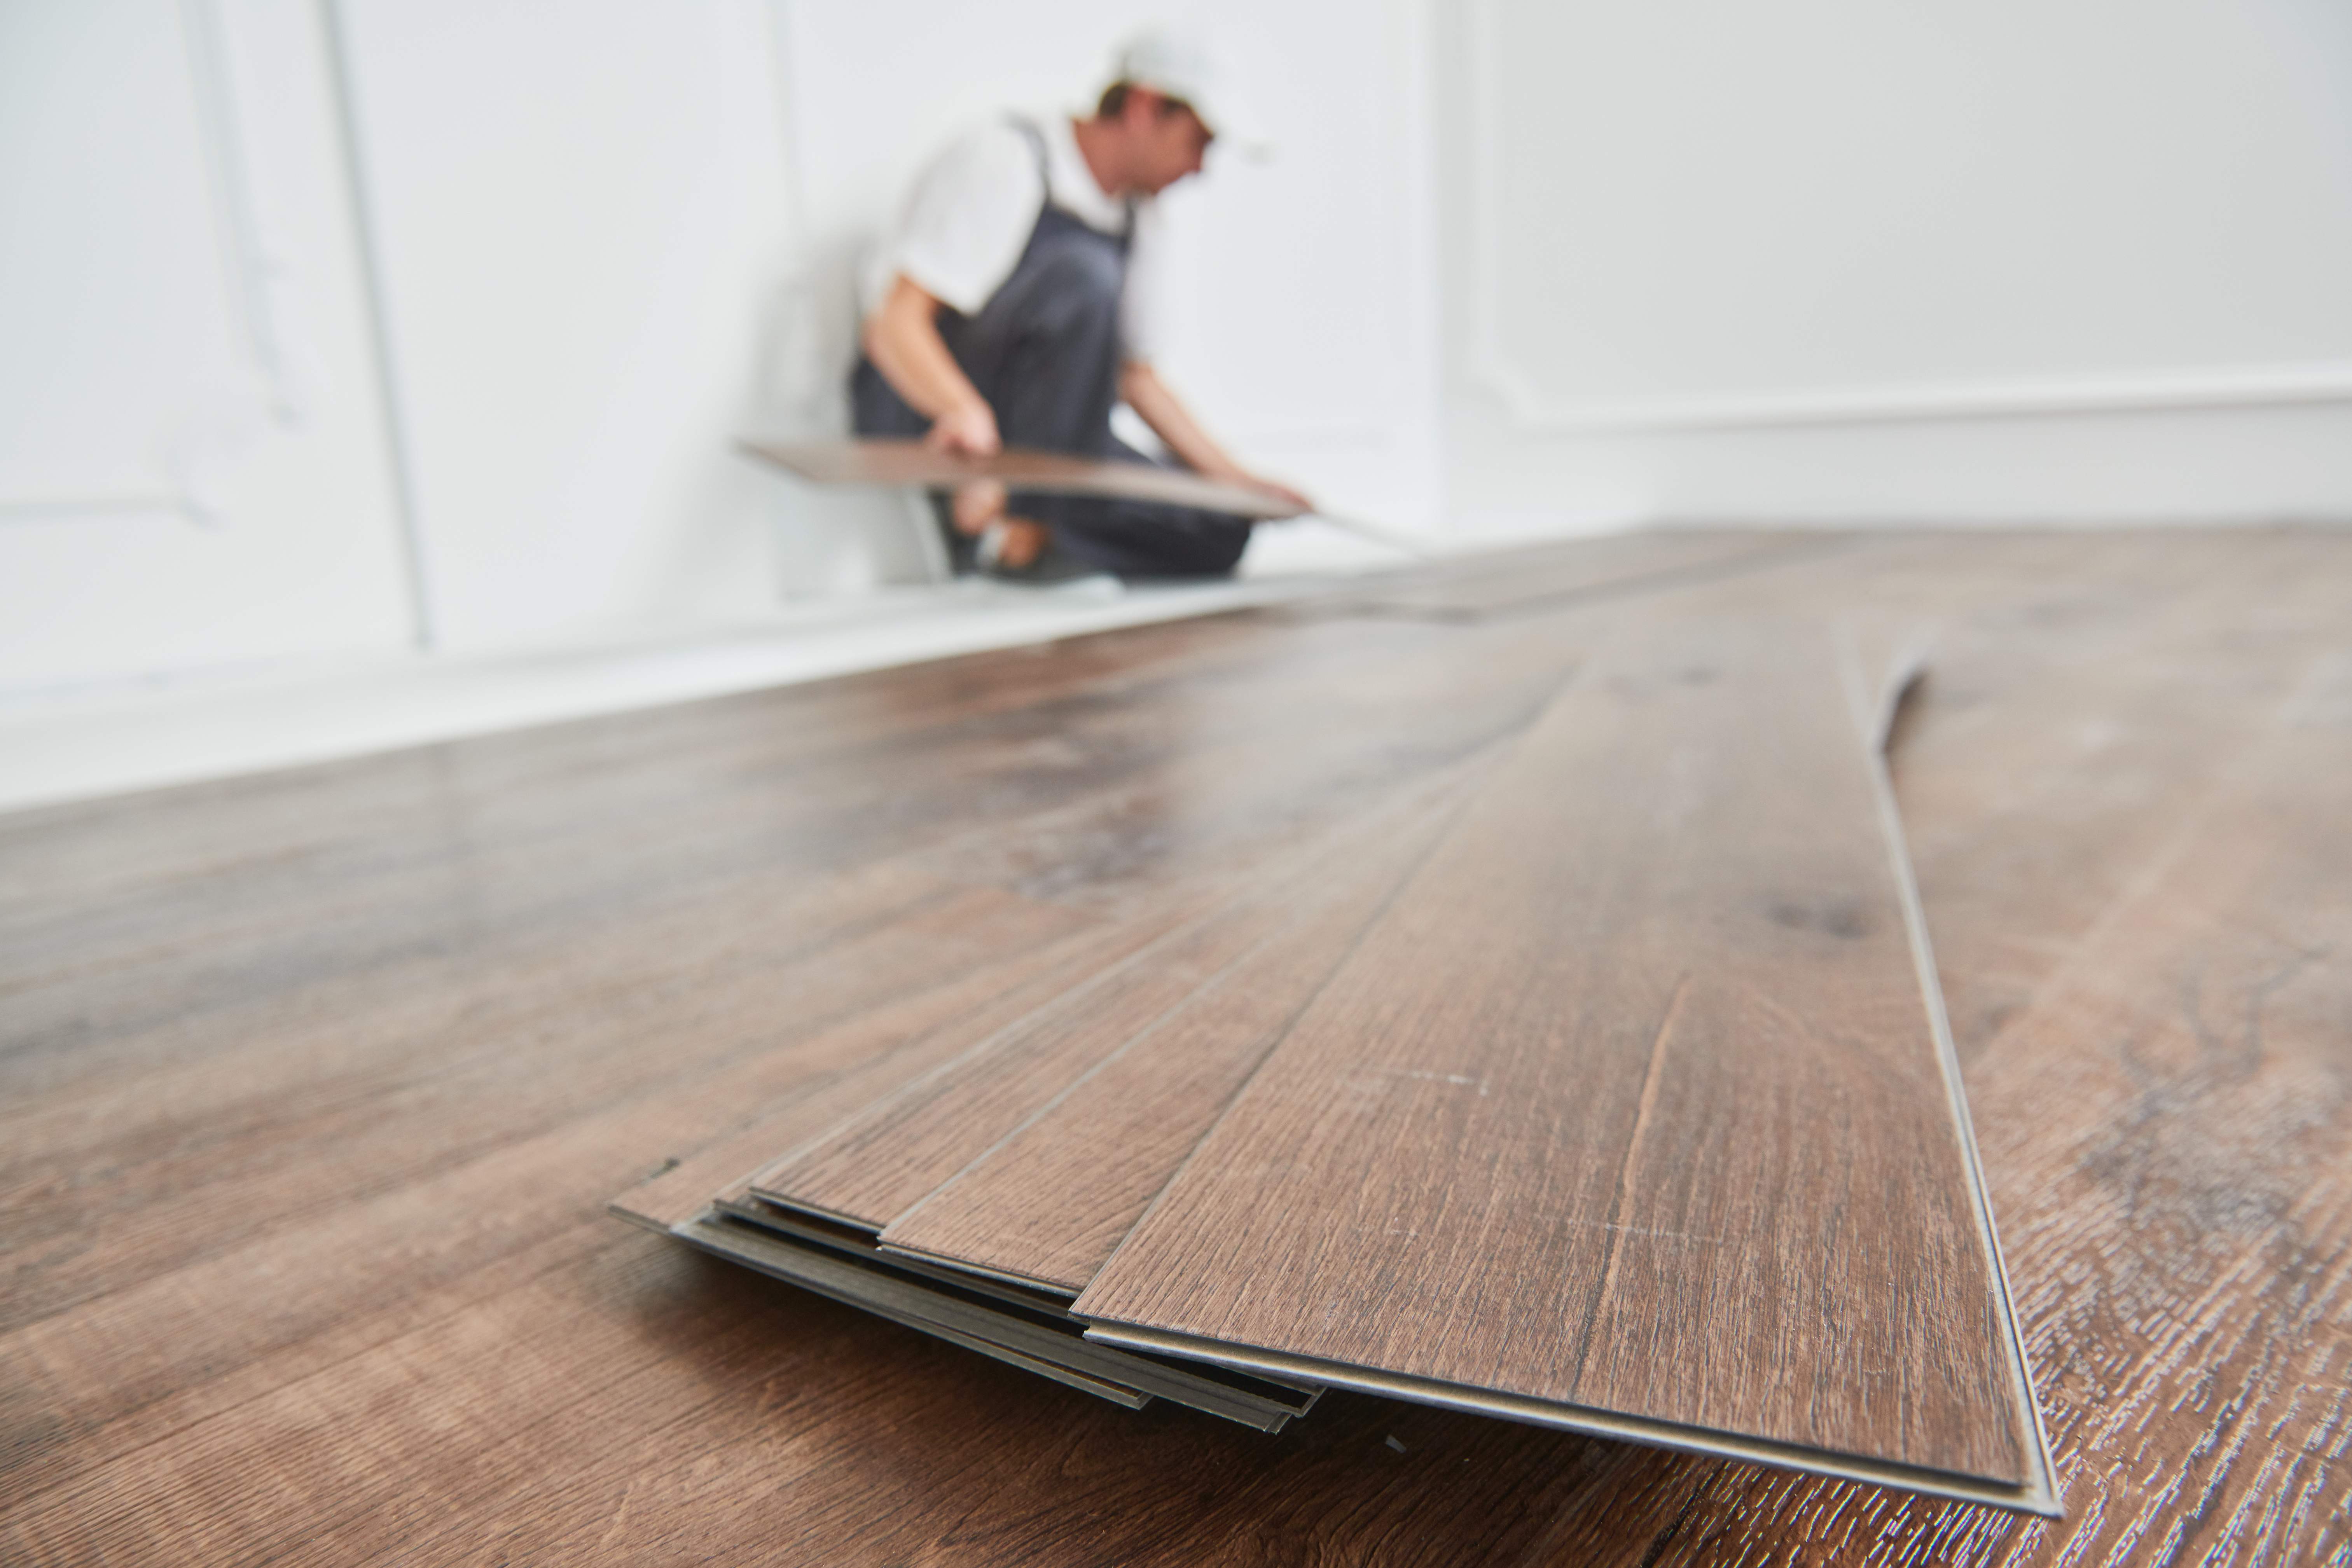 Durable Flooring Installations: Lasting Beauty for Your Home